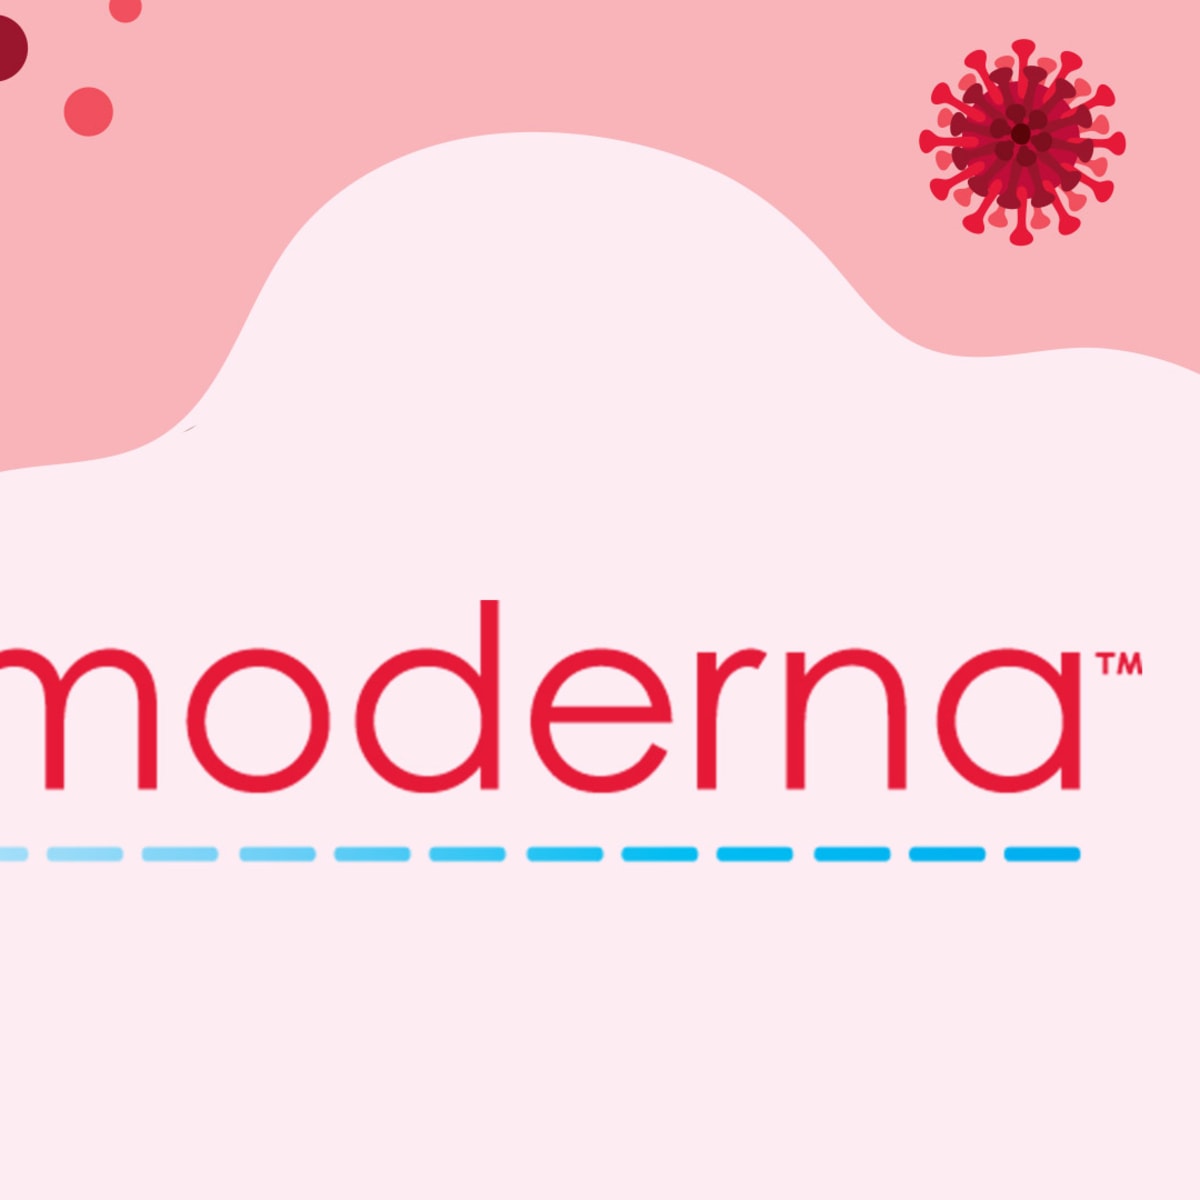 Why Is Moderna Stock Dropping